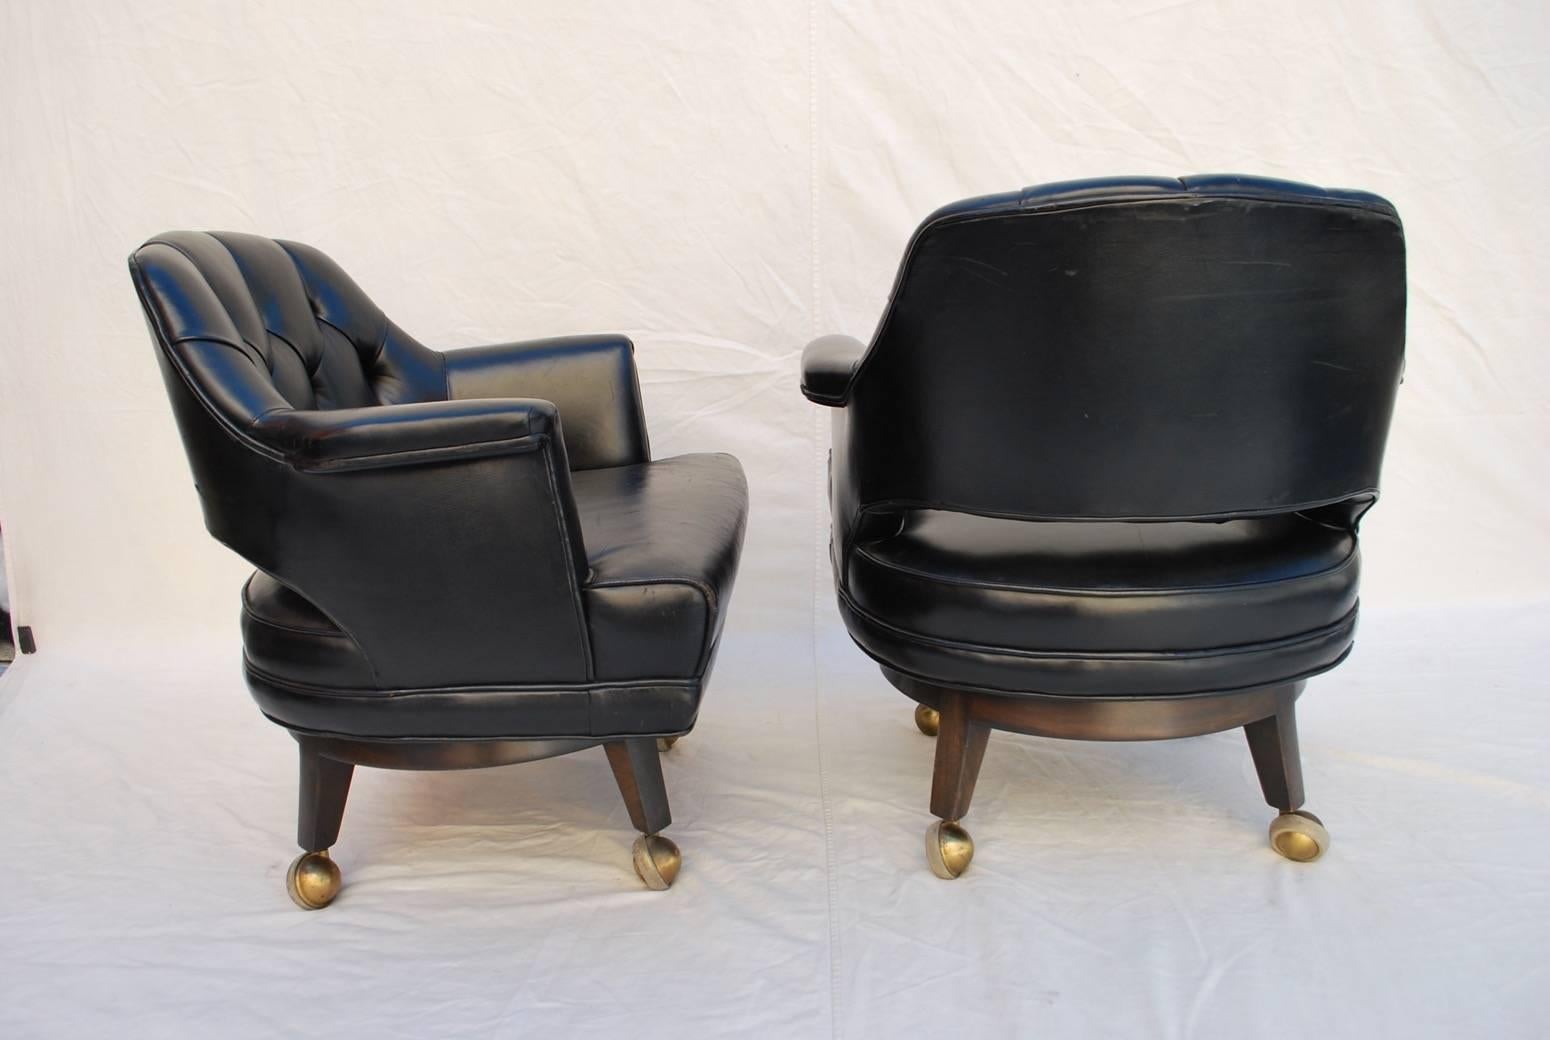 Beautiful and elegant pair of leather chairs, the patina of the leather is really nice, it has some wears and totally normal due to the age.